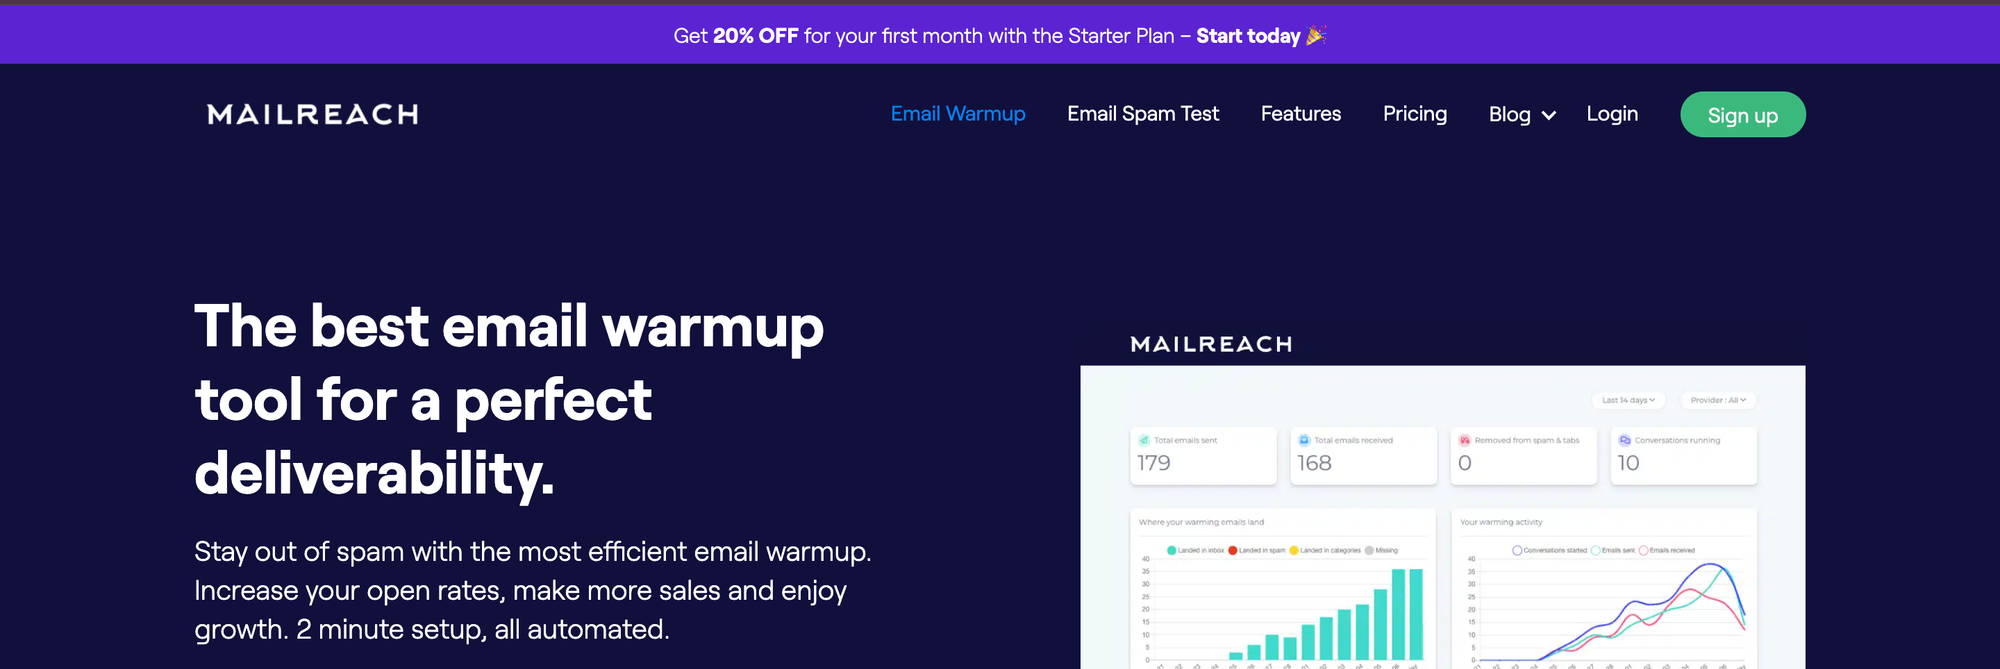 7 Best Email Warmup Tools (Pricing + Feature Comparison)